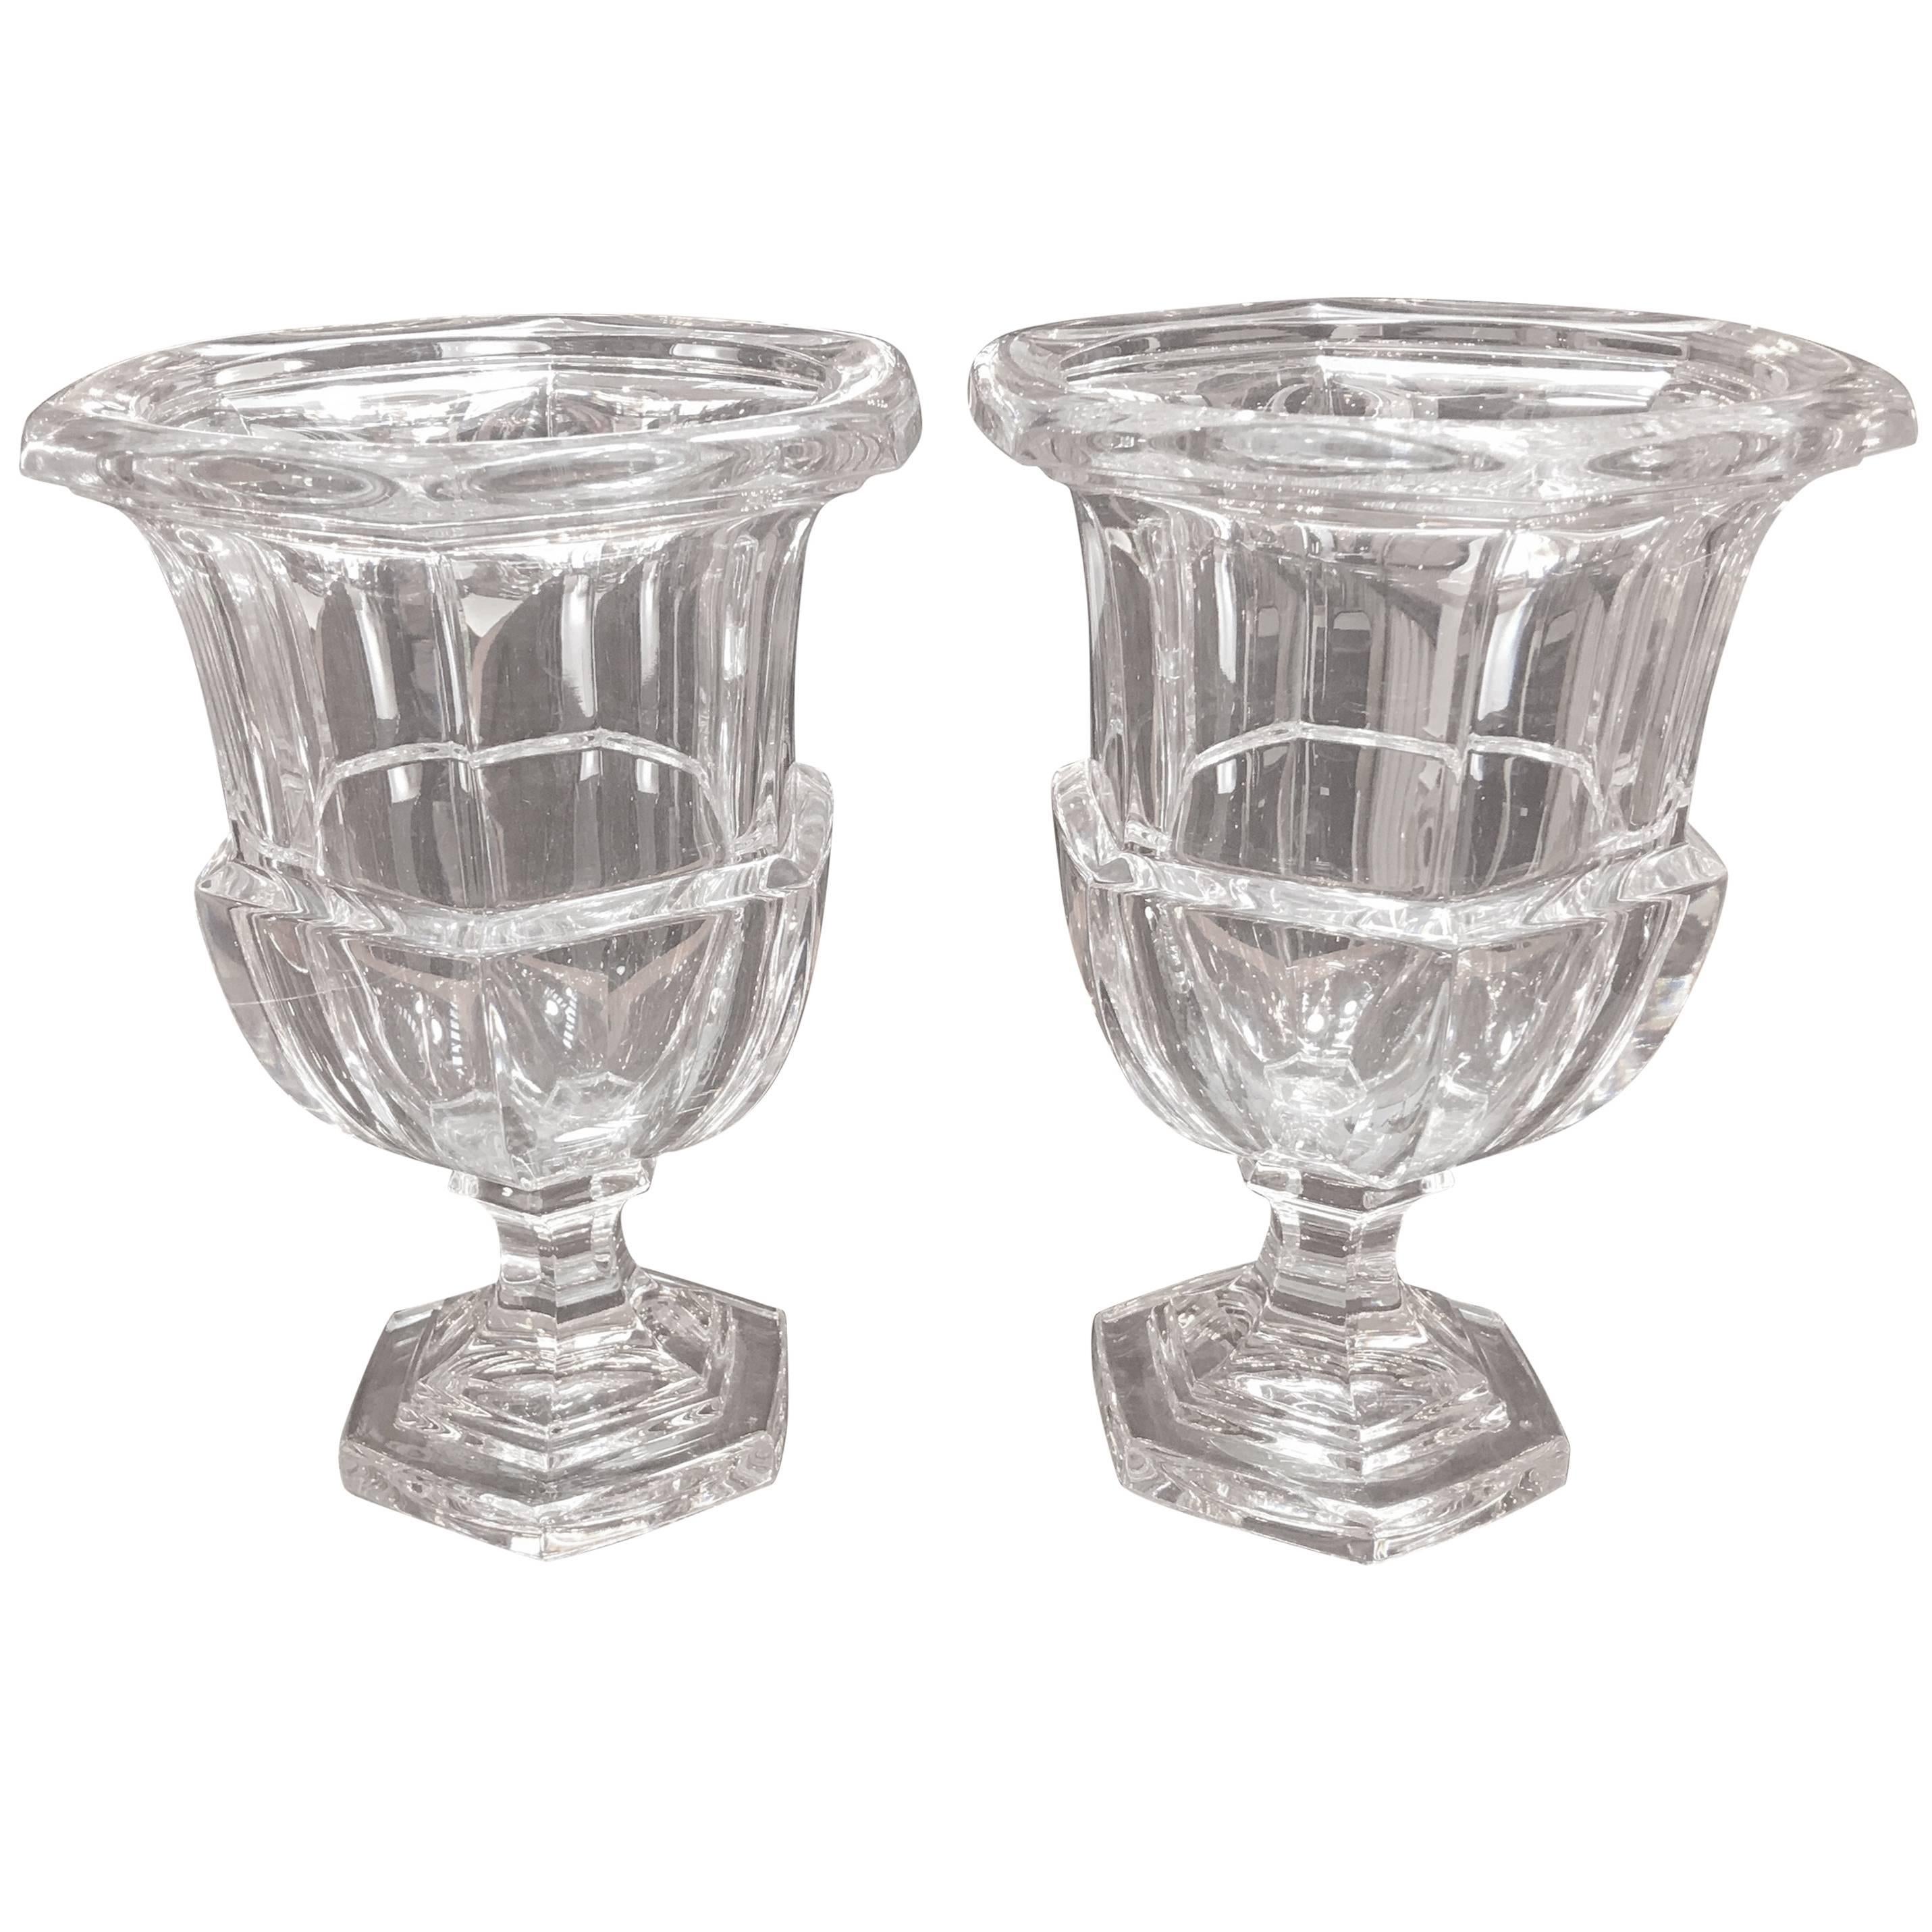 Pair of Water Clear Crystal Panel Cut Urns